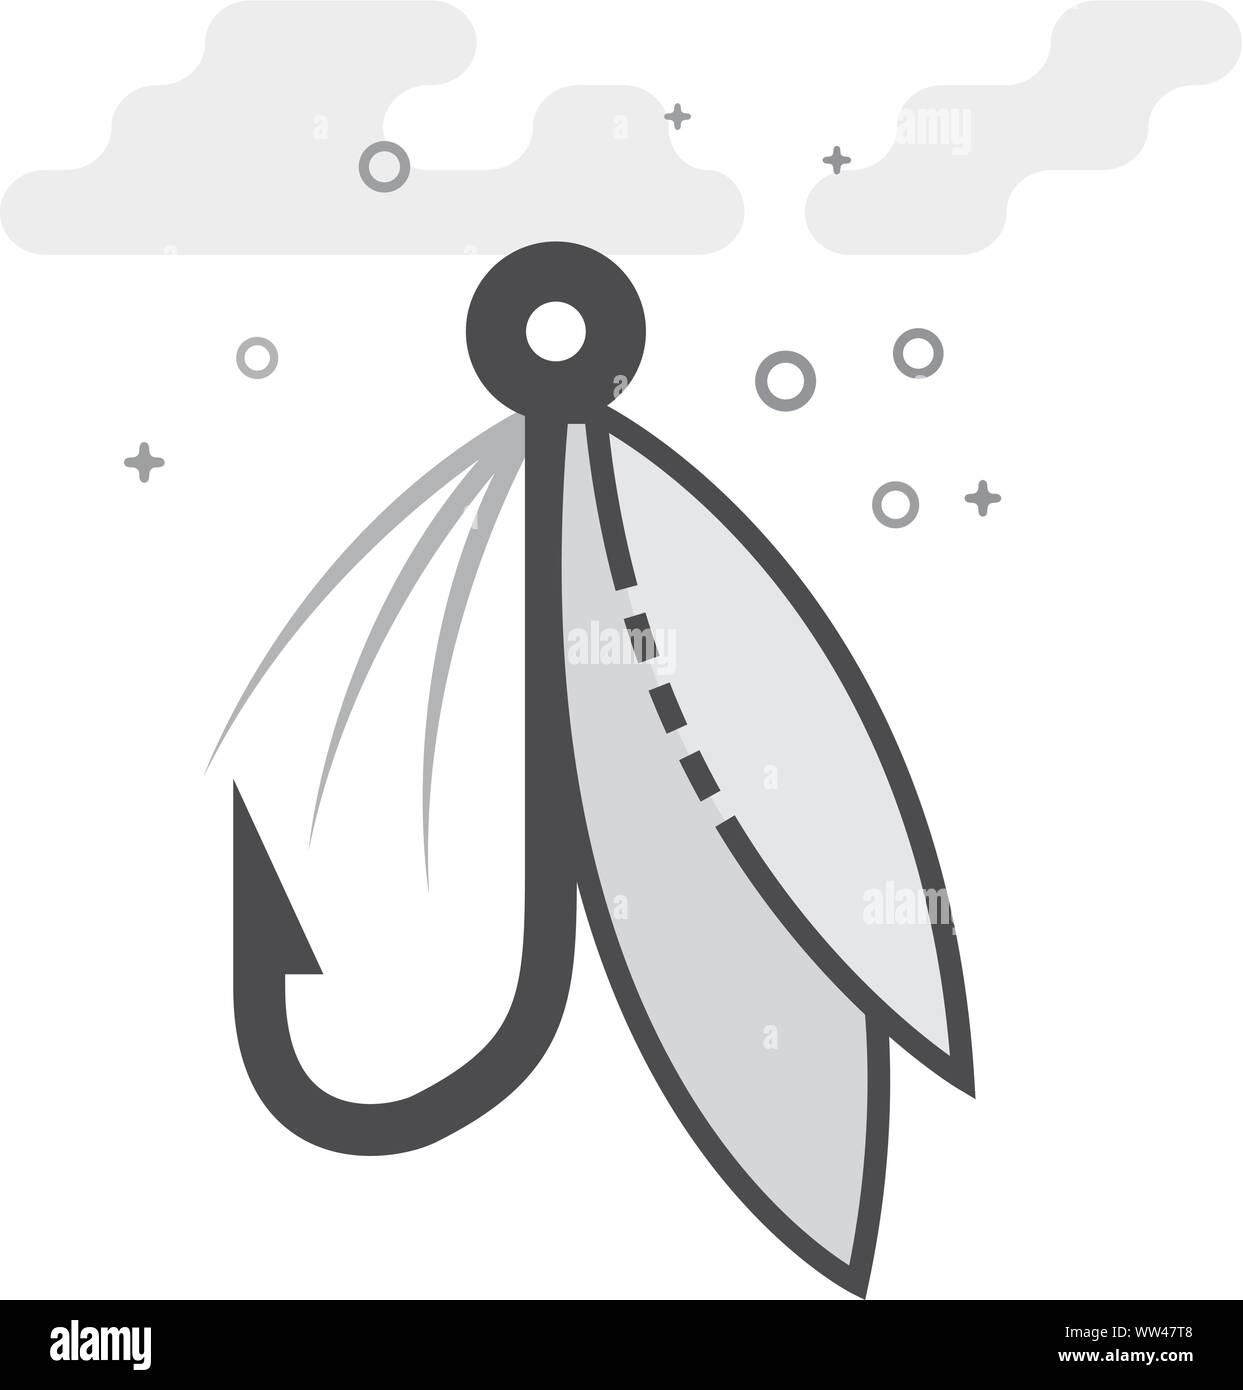 Fishing lure icon in flat outlined grayscale style. Vector illustration. Stock Vector